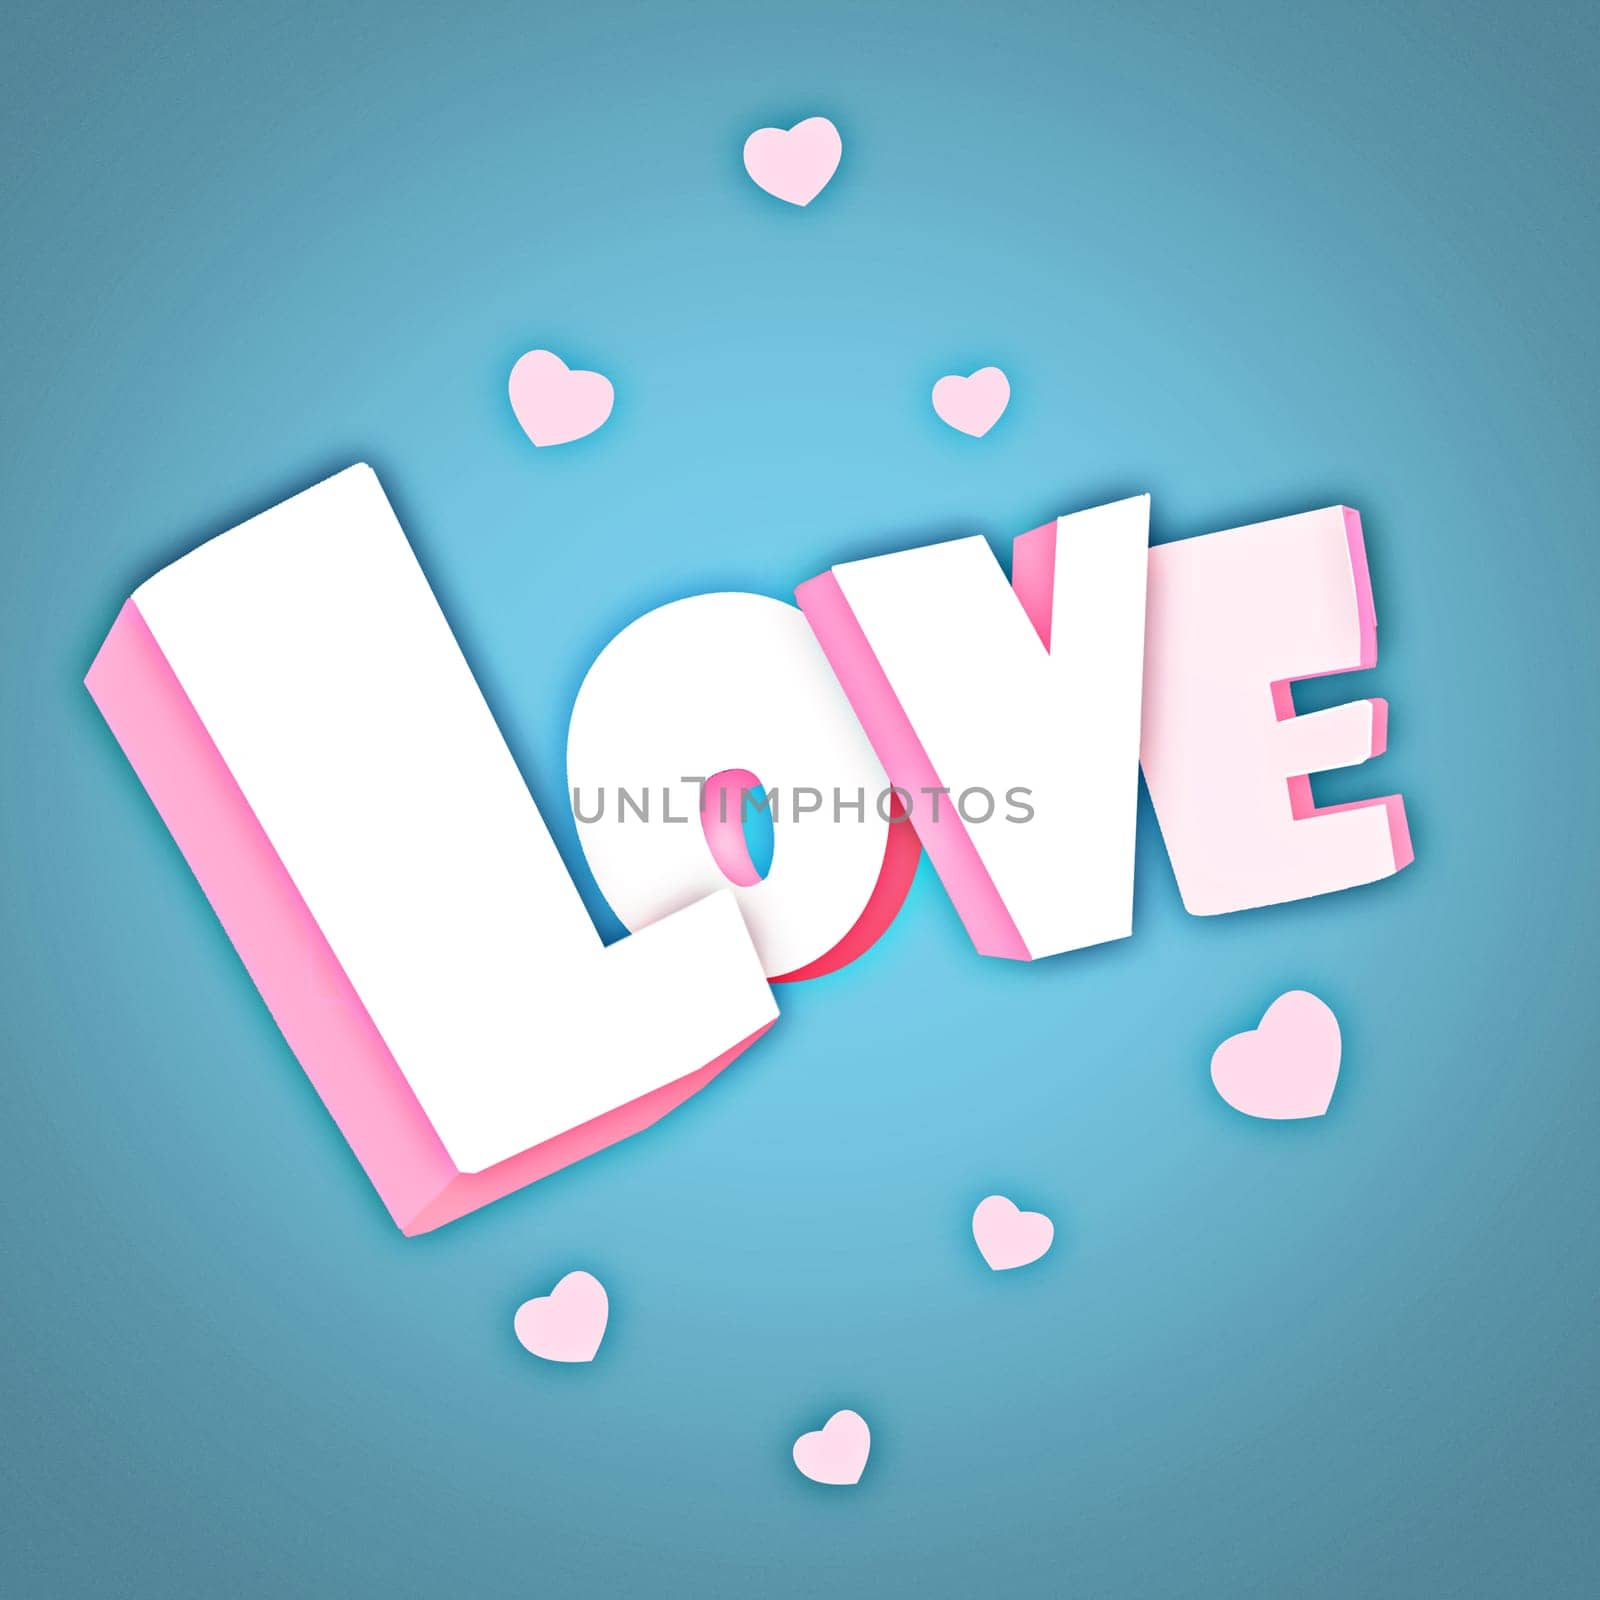 Love, heart and letters on graphic with word in studio for texture, pattern or design isolated on a blue background. Valentines day, sign and icons with text for art, label or typography for romance.